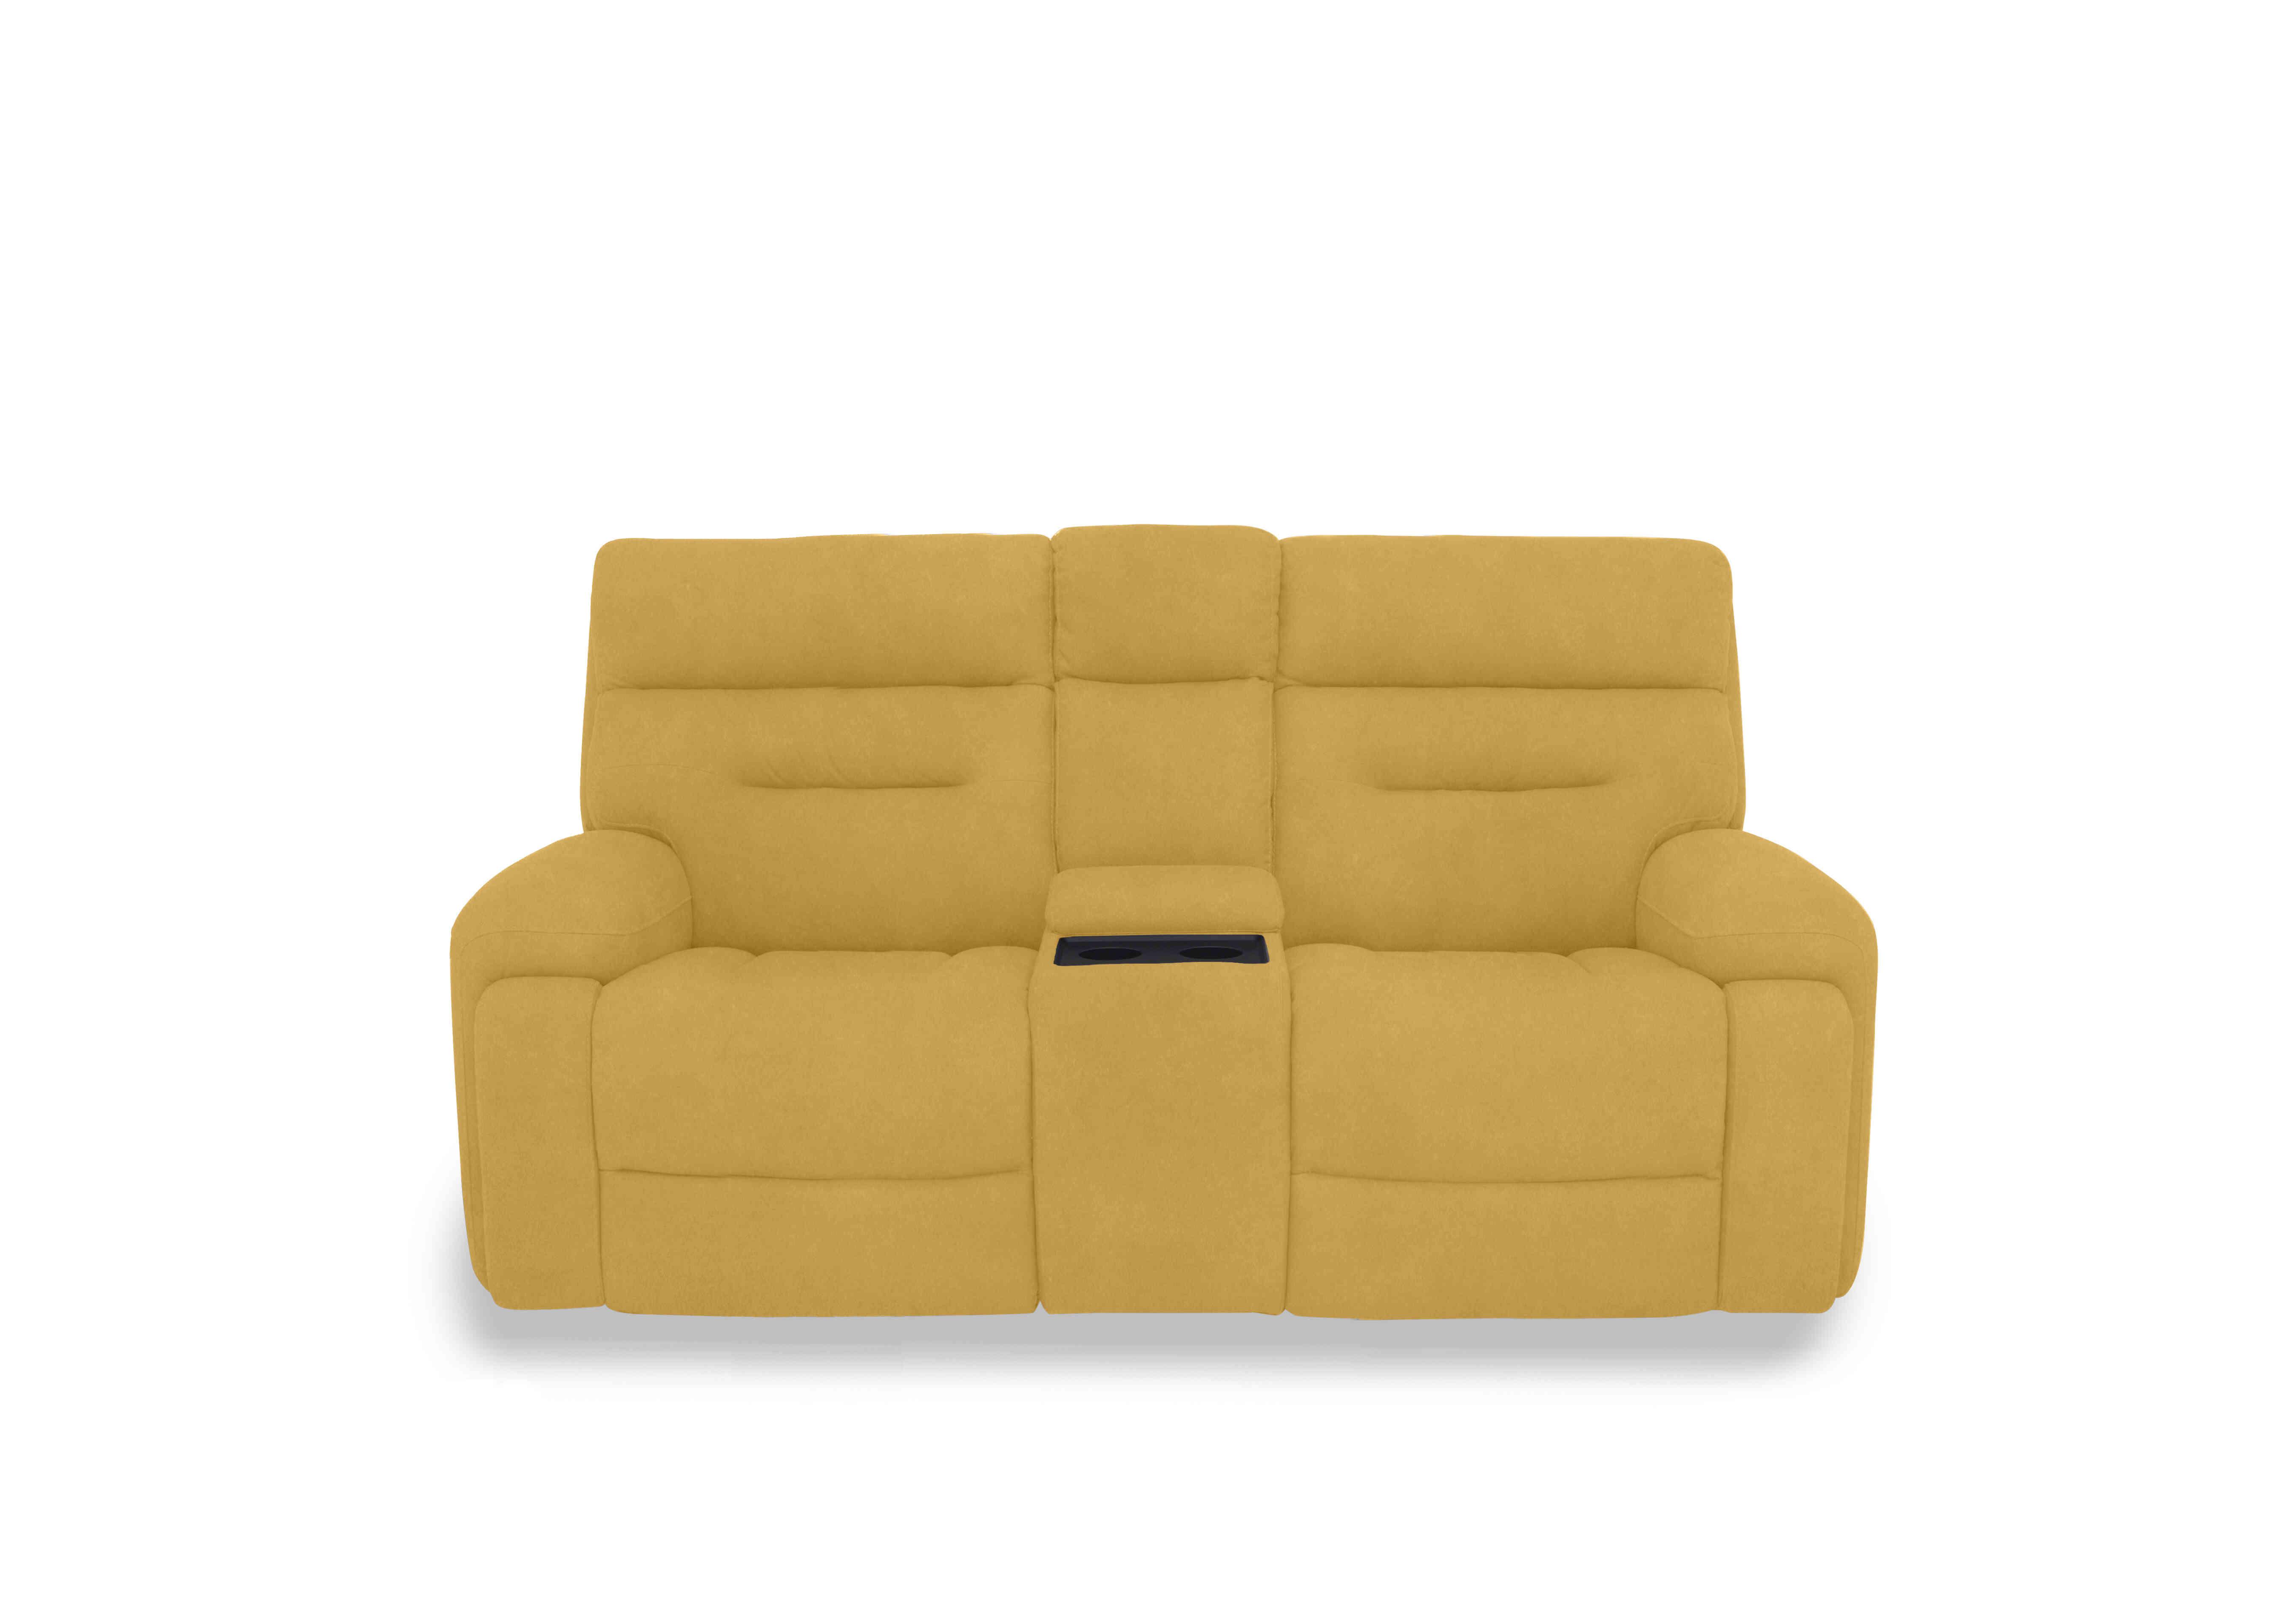 Cinemax Media 2 Seater Fabric Power Recliner Sofa with Power Headrests in Vv-0310 Velvet Giallo on Furniture Village